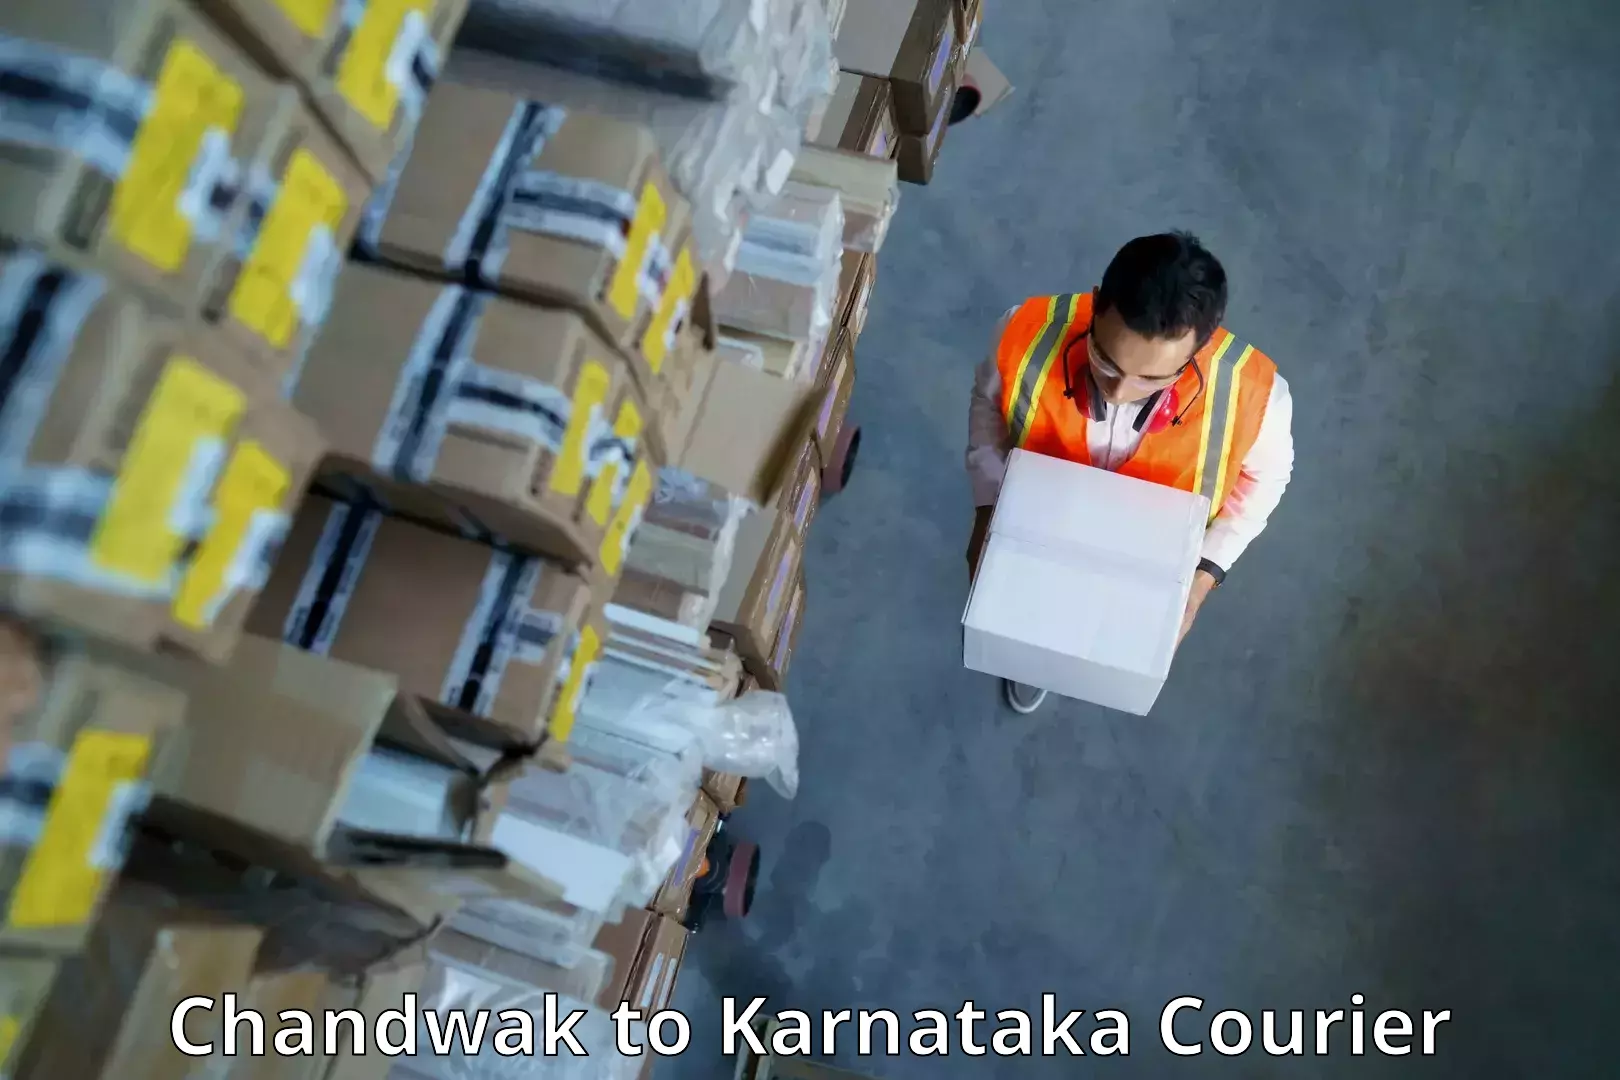 State-of-the-art courier technology Chandwak to Tiptur